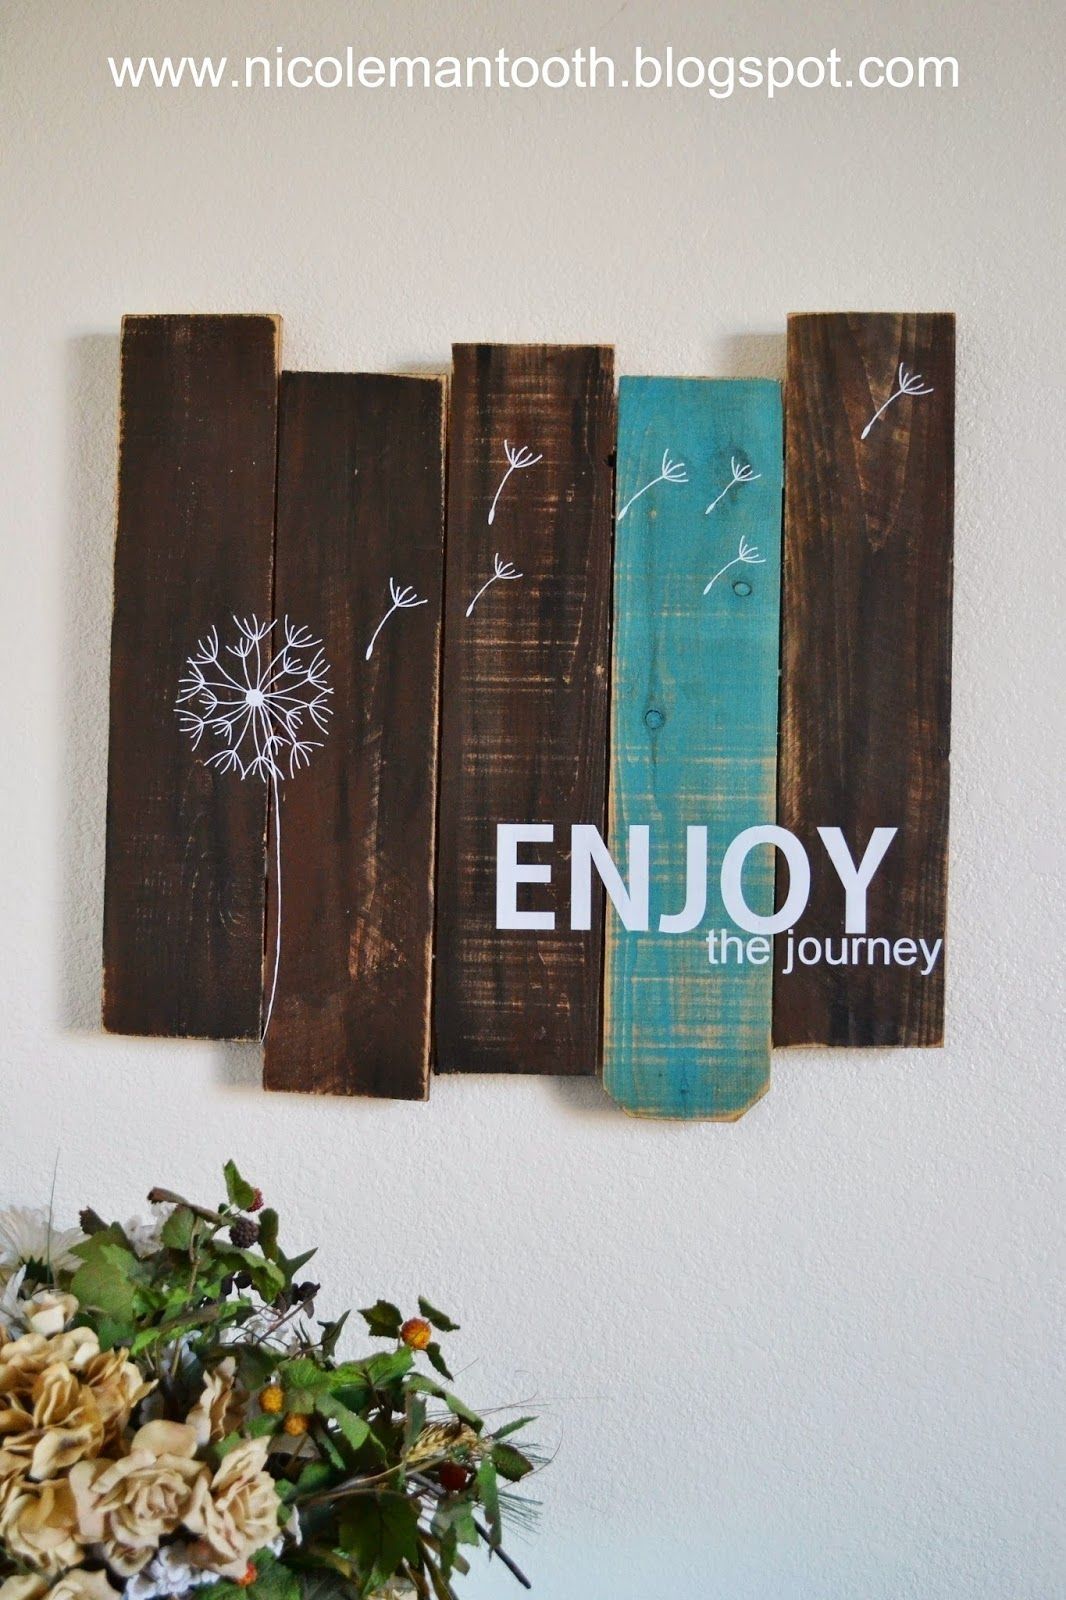 Random Ramblings Amazing Wall Art! I Love The One Blue And Offset Intended For Pallet Wall Art (View 6 of 20)